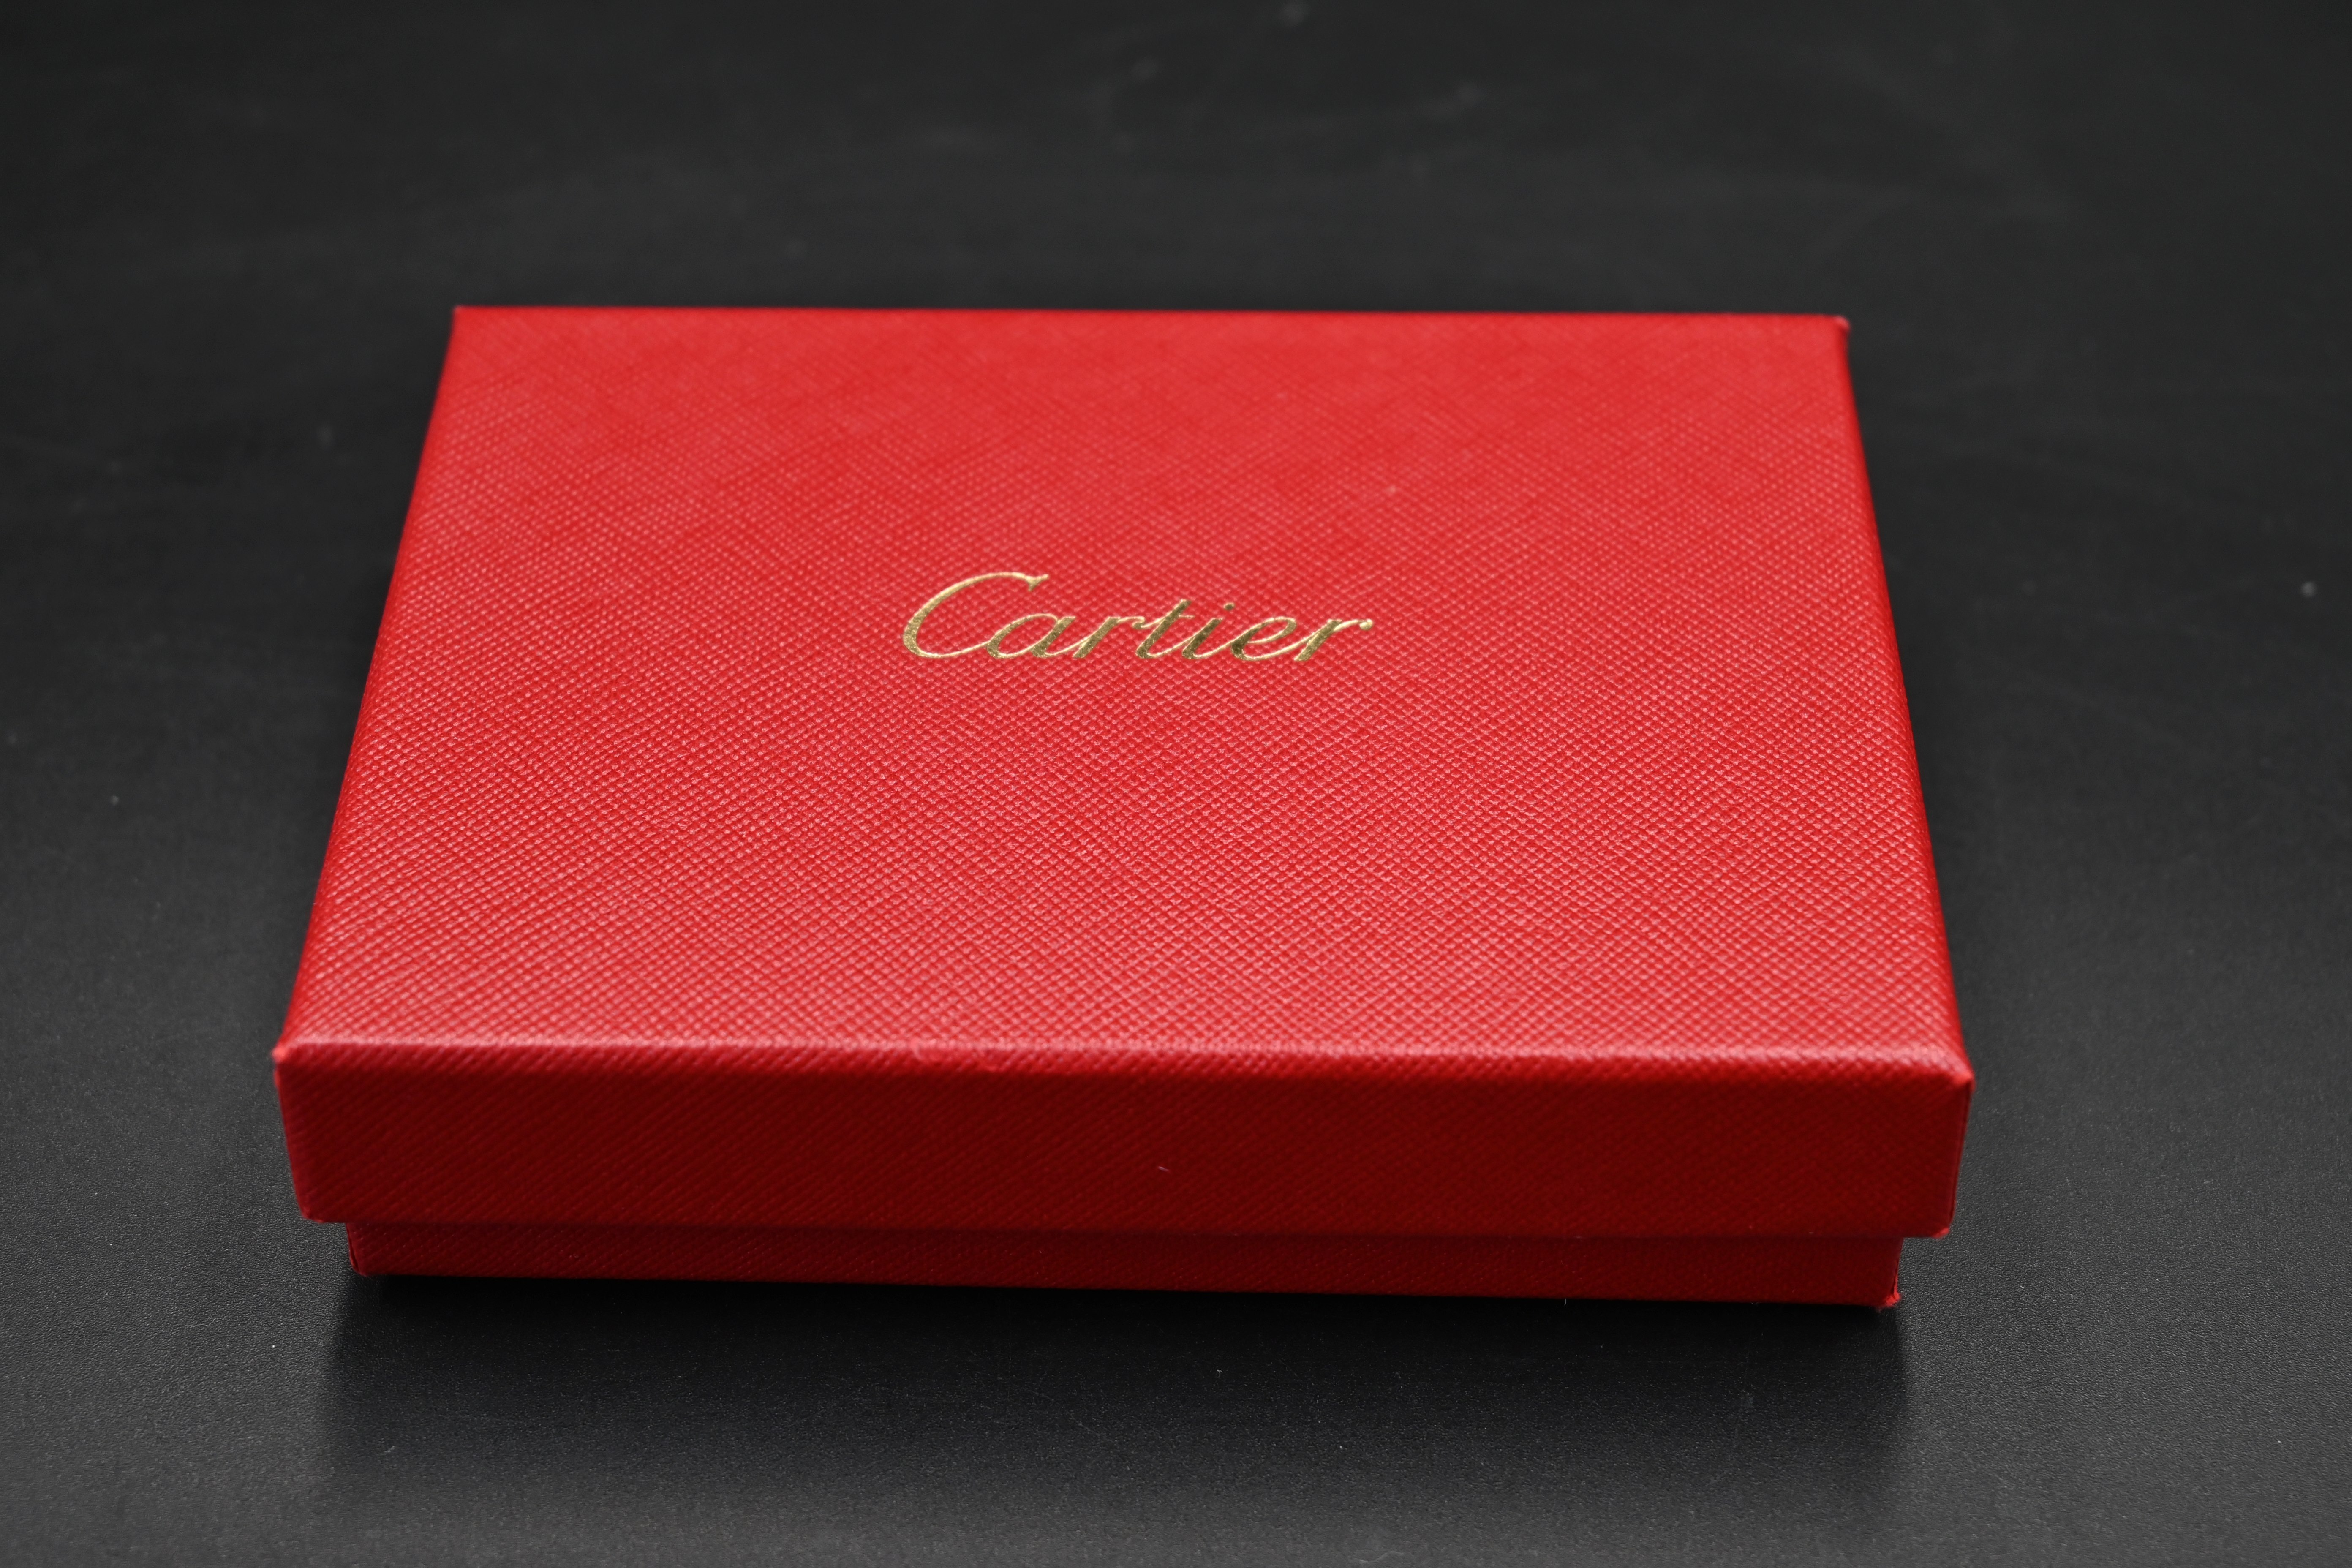 Cartier calf skin leather credit card wallet embossed with makers logo to centre,and with gold - Image 7 of 7